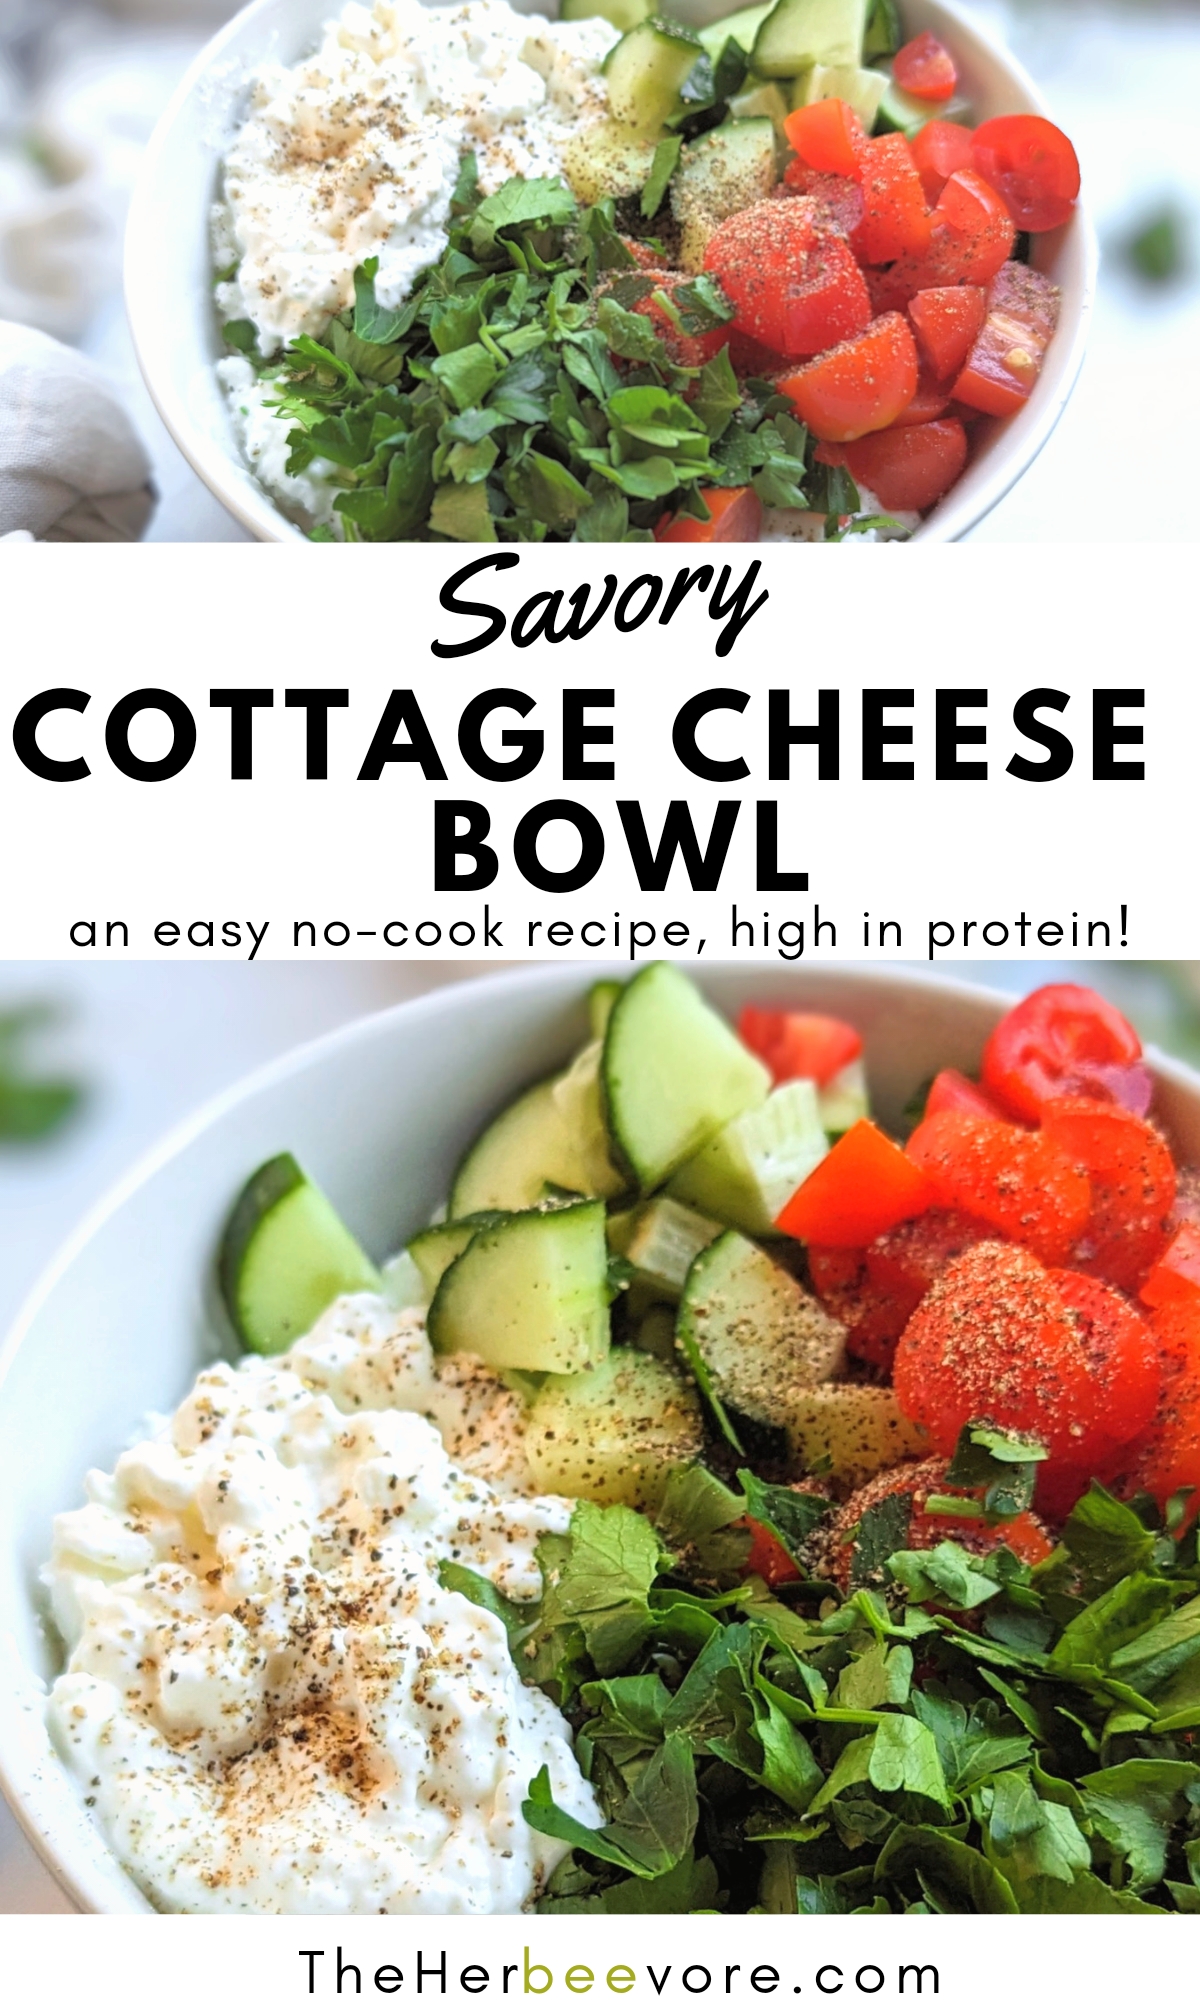 cottage cheese salad with vegetables recipe cottage cheese bowl with tomatoes and cucumber in a red wine vinegar dressing